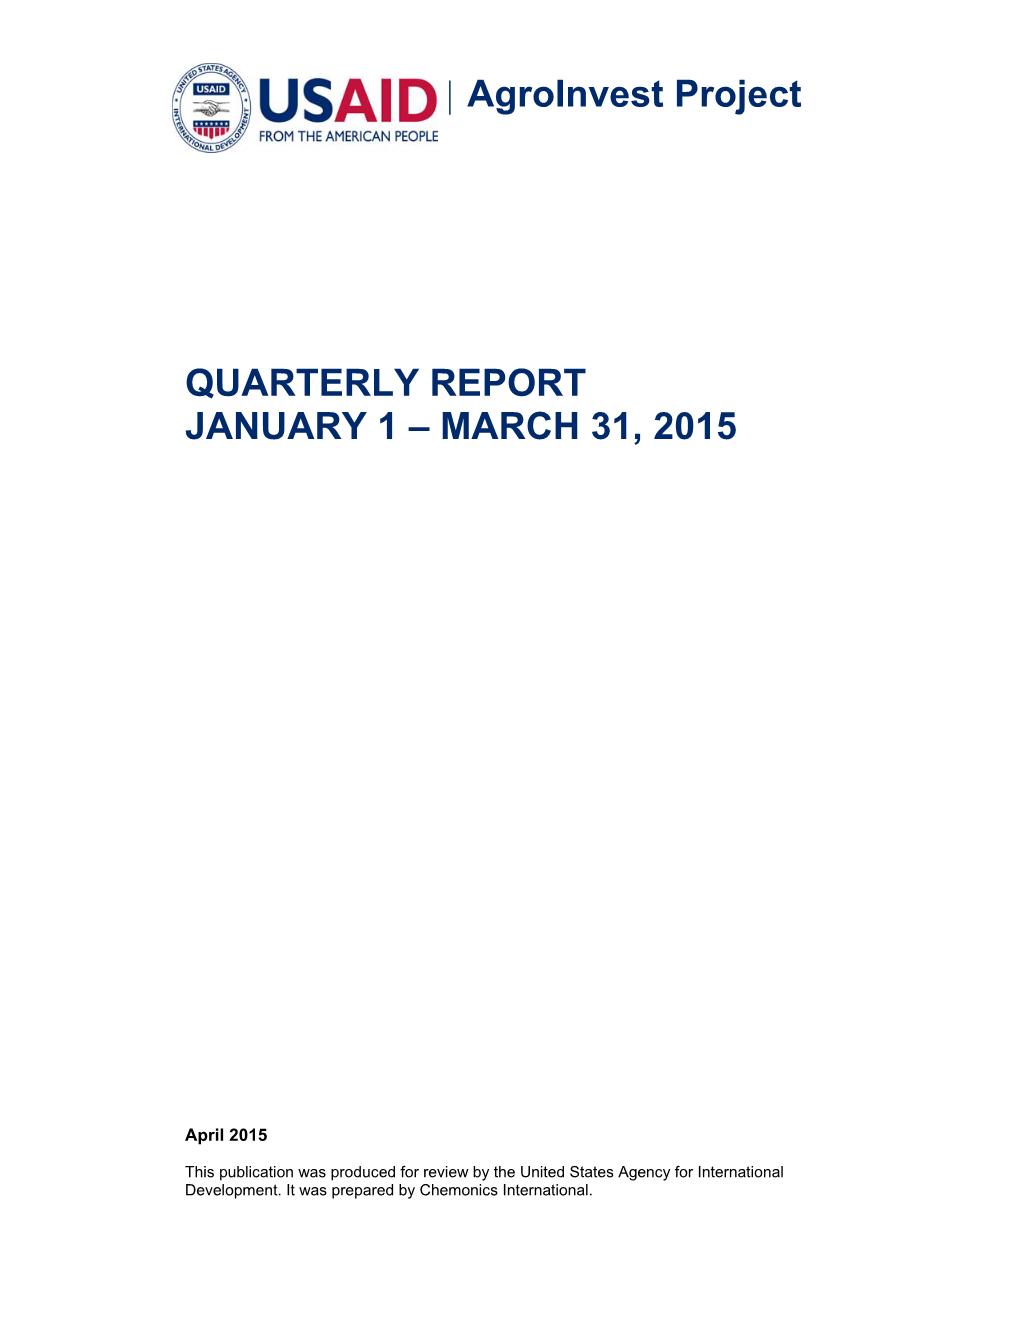 | Agroinvest Project QUARTERLY REPORT JANUARY 1 – MARCH 31